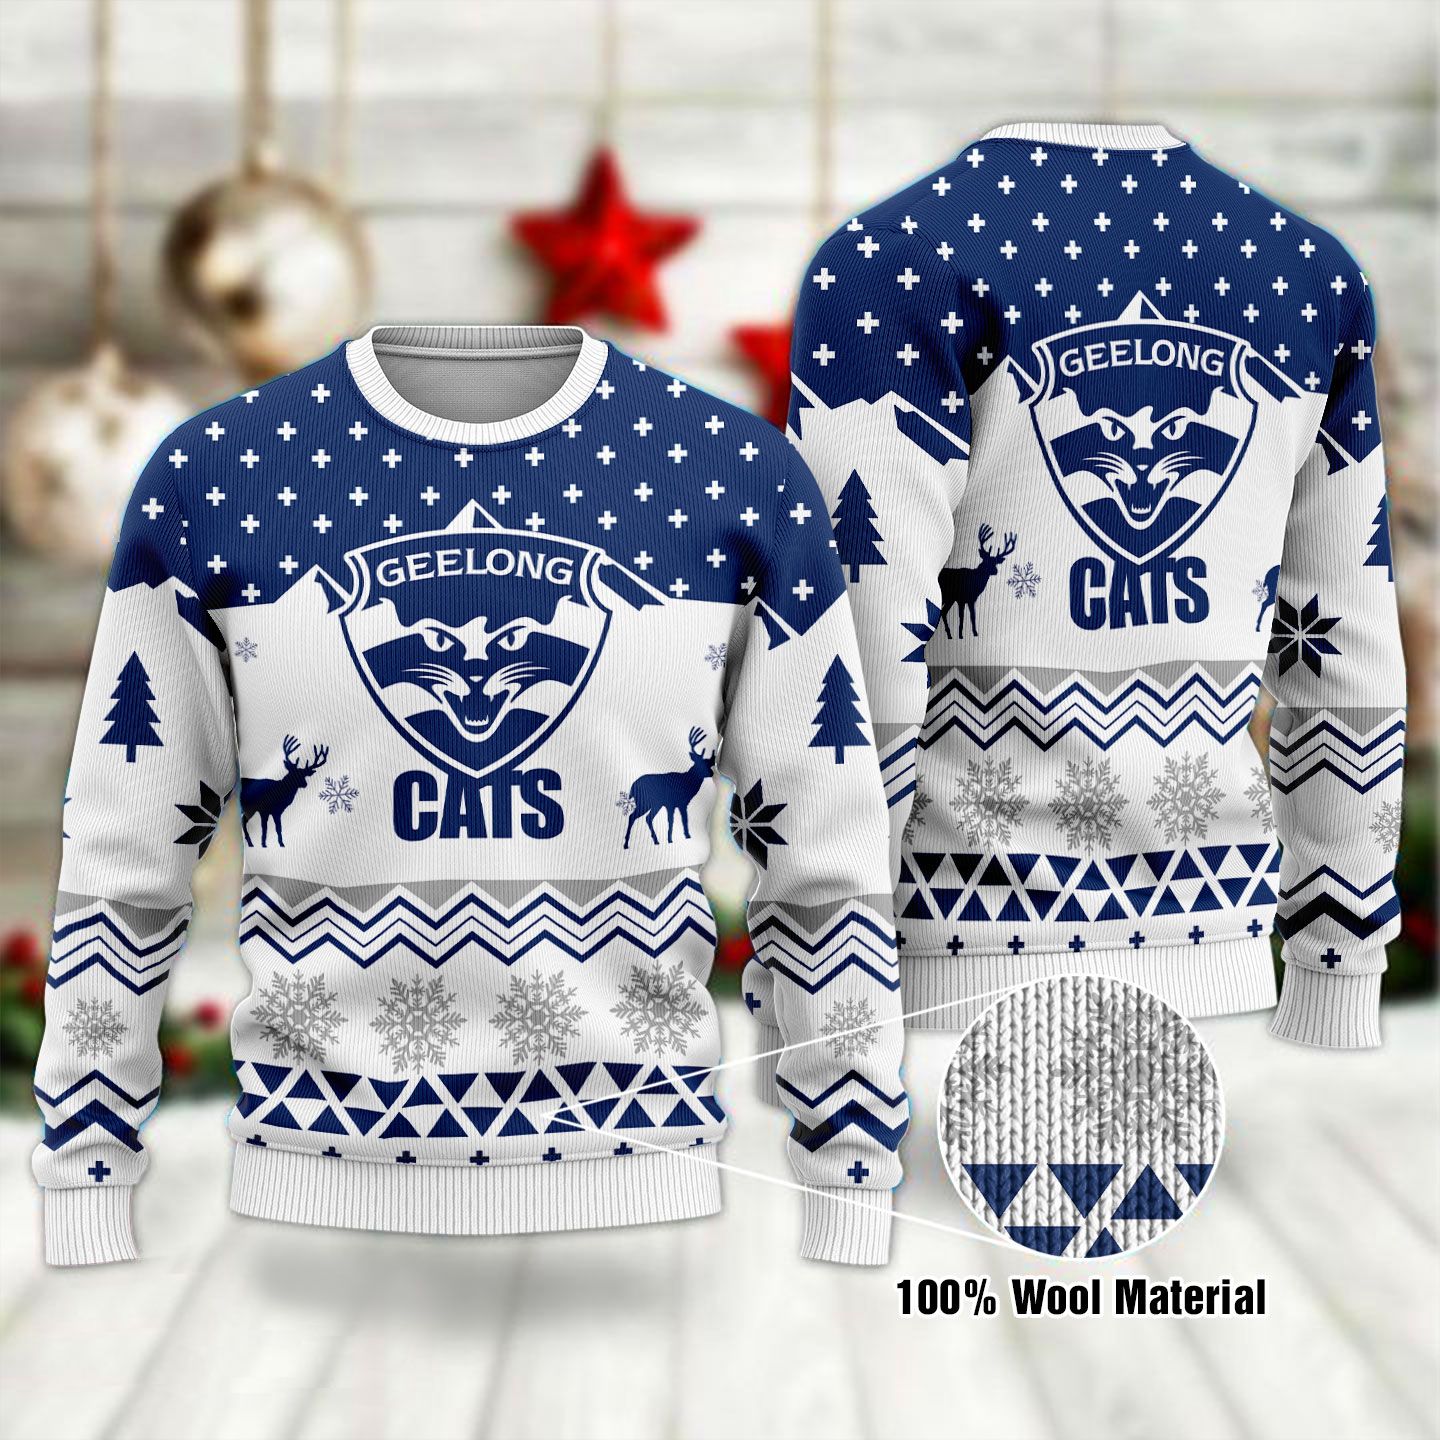 Middily- Geelong Football Club AFL - Ugly Xmas Sweater,Holiday 2021 Sweater,Secret Santa,Christmas Sweater Gift,Gag Gift - 3D Sweater